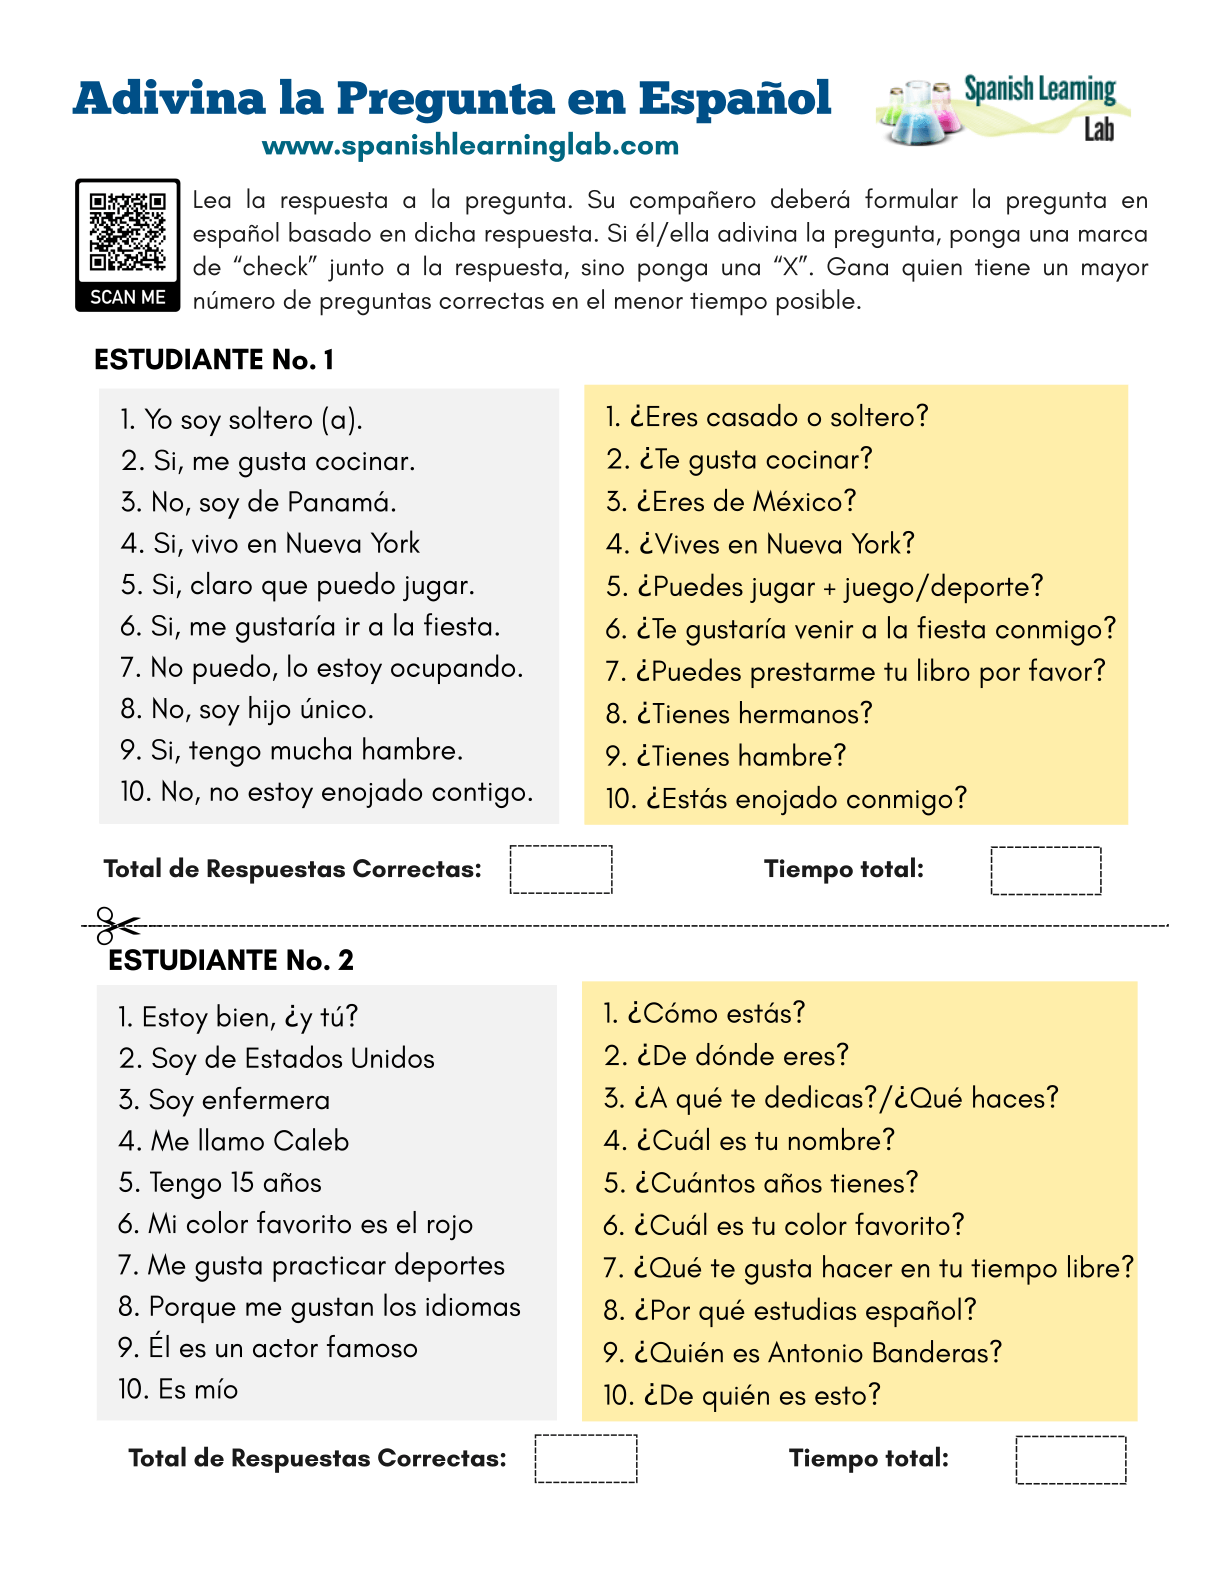 Making Questions in Spanish - PDF Worksheet - SpanishLearningLab